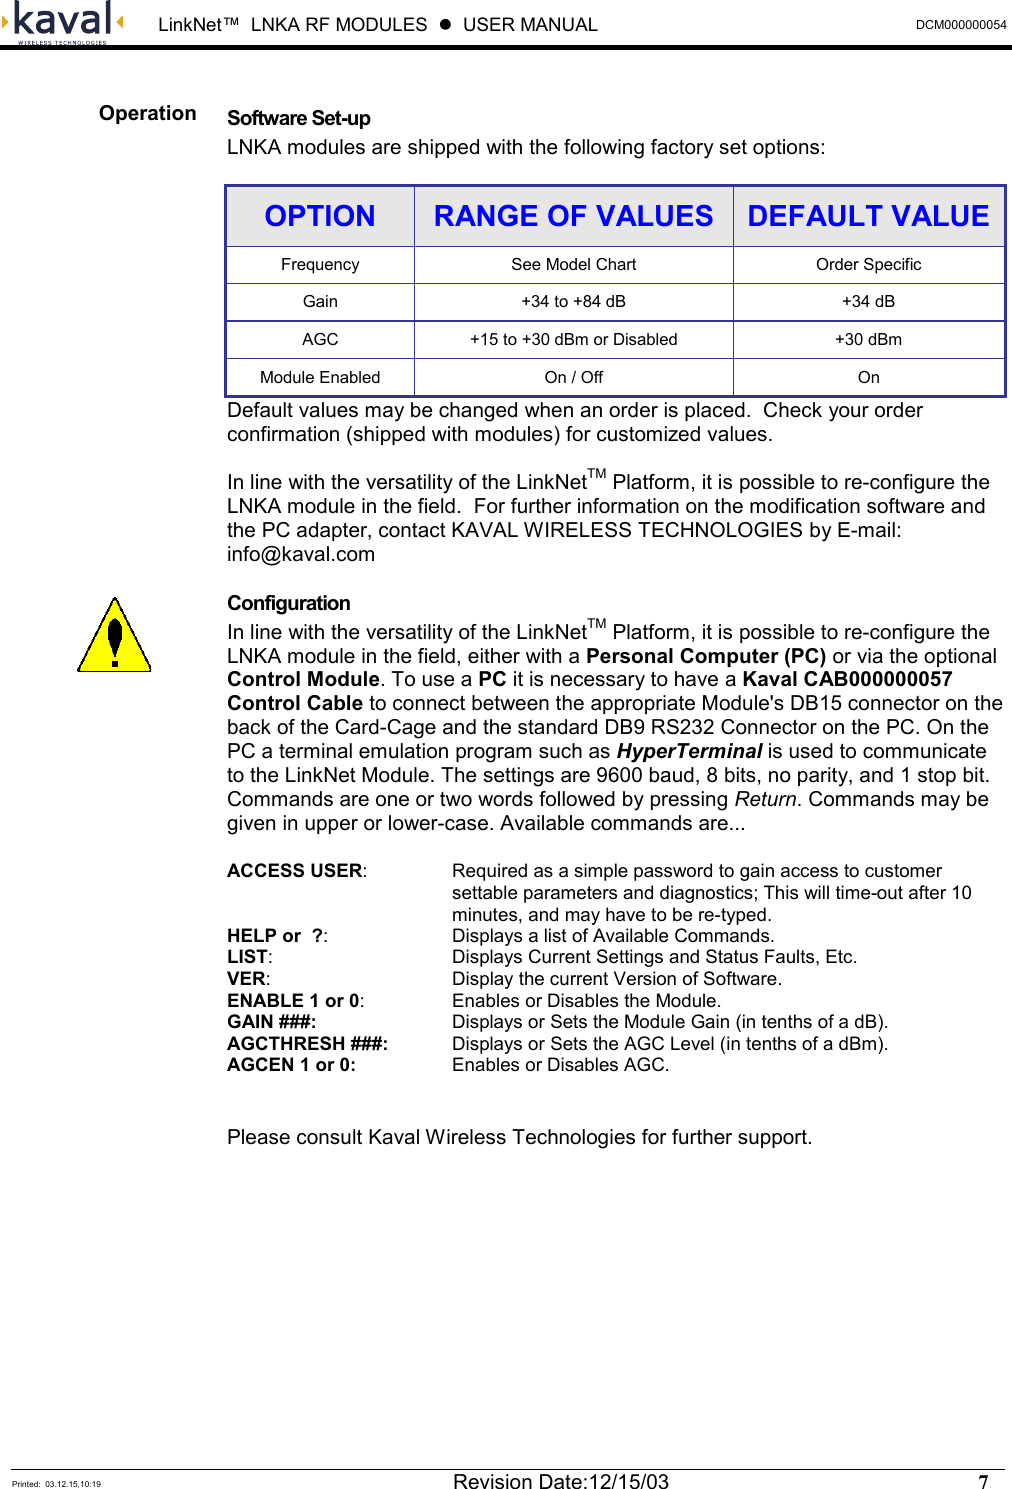  LinkNet™  LNKA RF MODULES  z  USER MANUAL  DCM000000054  Printed:  03.12.15,10:19  Revision Date:12/15/03    7    Software Set-up LNKA modules are shipped with the following factory set options: OPTION  RANGE OF VALUES  DEFAULT VALUEFrequency  See Model Chart  Order Specific Gain +34 to +84 dB  +34 dB AGC  +15 to +30 dBm or Disabled  +30 dBm Module Enabled  On / Off  On Default values may be changed when an order is placed.  Check your order confirmation (shipped with modules) for customized values.   In line with the versatility of the LinkNetTM Platform, it is possible to re-configure the LNKA module in the field.  For further information on the modification software and the PC adapter, contact KAVAL WIRELESS TECHNOLOGIES by E-mail: info@kaval.com Configuration In line with the versatility of the LinkNetTM Platform, it is possible to re-configure the LNKA module in the field, either with a Personal Computer (PC) or via the optional Control Module. To use a PC it is necessary to have a Kaval CAB000000057 Control Cable to connect between the appropriate Module&apos;s DB15 connector on the back of the Card-Cage and the standard DB9 RS232 Connector on the PC. On the PC a terminal emulation program such as HyperTerminal is used to communicate to the LinkNet Module. The settings are 9600 baud, 8 bits, no parity, and 1 stop bit. Commands are one or two words followed by pressing Return. Commands may be given in upper or lower-case. Available commands are... ACCESS USER:  Required as a simple password to gain access to customer settable parameters and diagnostics; This will time-out after 10 minutes, and may have to be re-typed. HELP or  ?:  Displays a list of Available Commands. LIST:  Displays Current Settings and Status Faults, Etc. VER:  Display the current Version of Software. ENABLE 1 or 0:  Enables or Disables the Module. GAIN ###:  Displays or Sets the Module Gain (in tenths of a dB). AGCTHRESH ###:  Displays or Sets the AGC Level (in tenths of a dBm). AGCEN 1 or 0:  Enables or Disables AGC.  Please consult Kaval Wireless Technologies for further support. Operation  